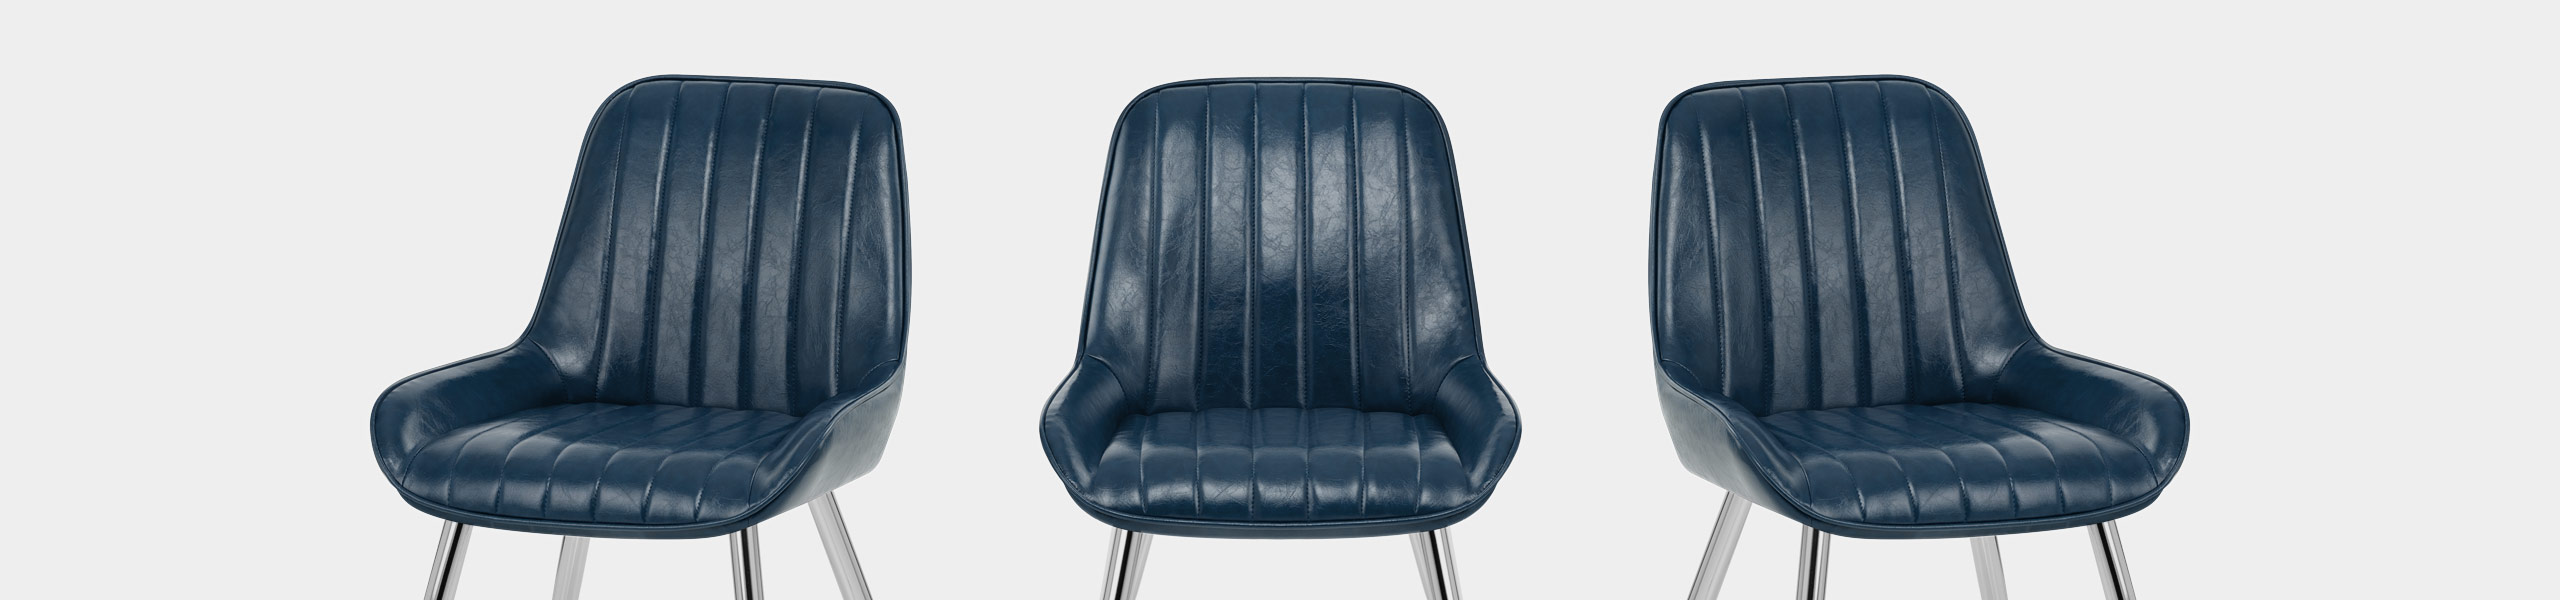 Mustang Chrome  Chair Antique Blue Video Banner